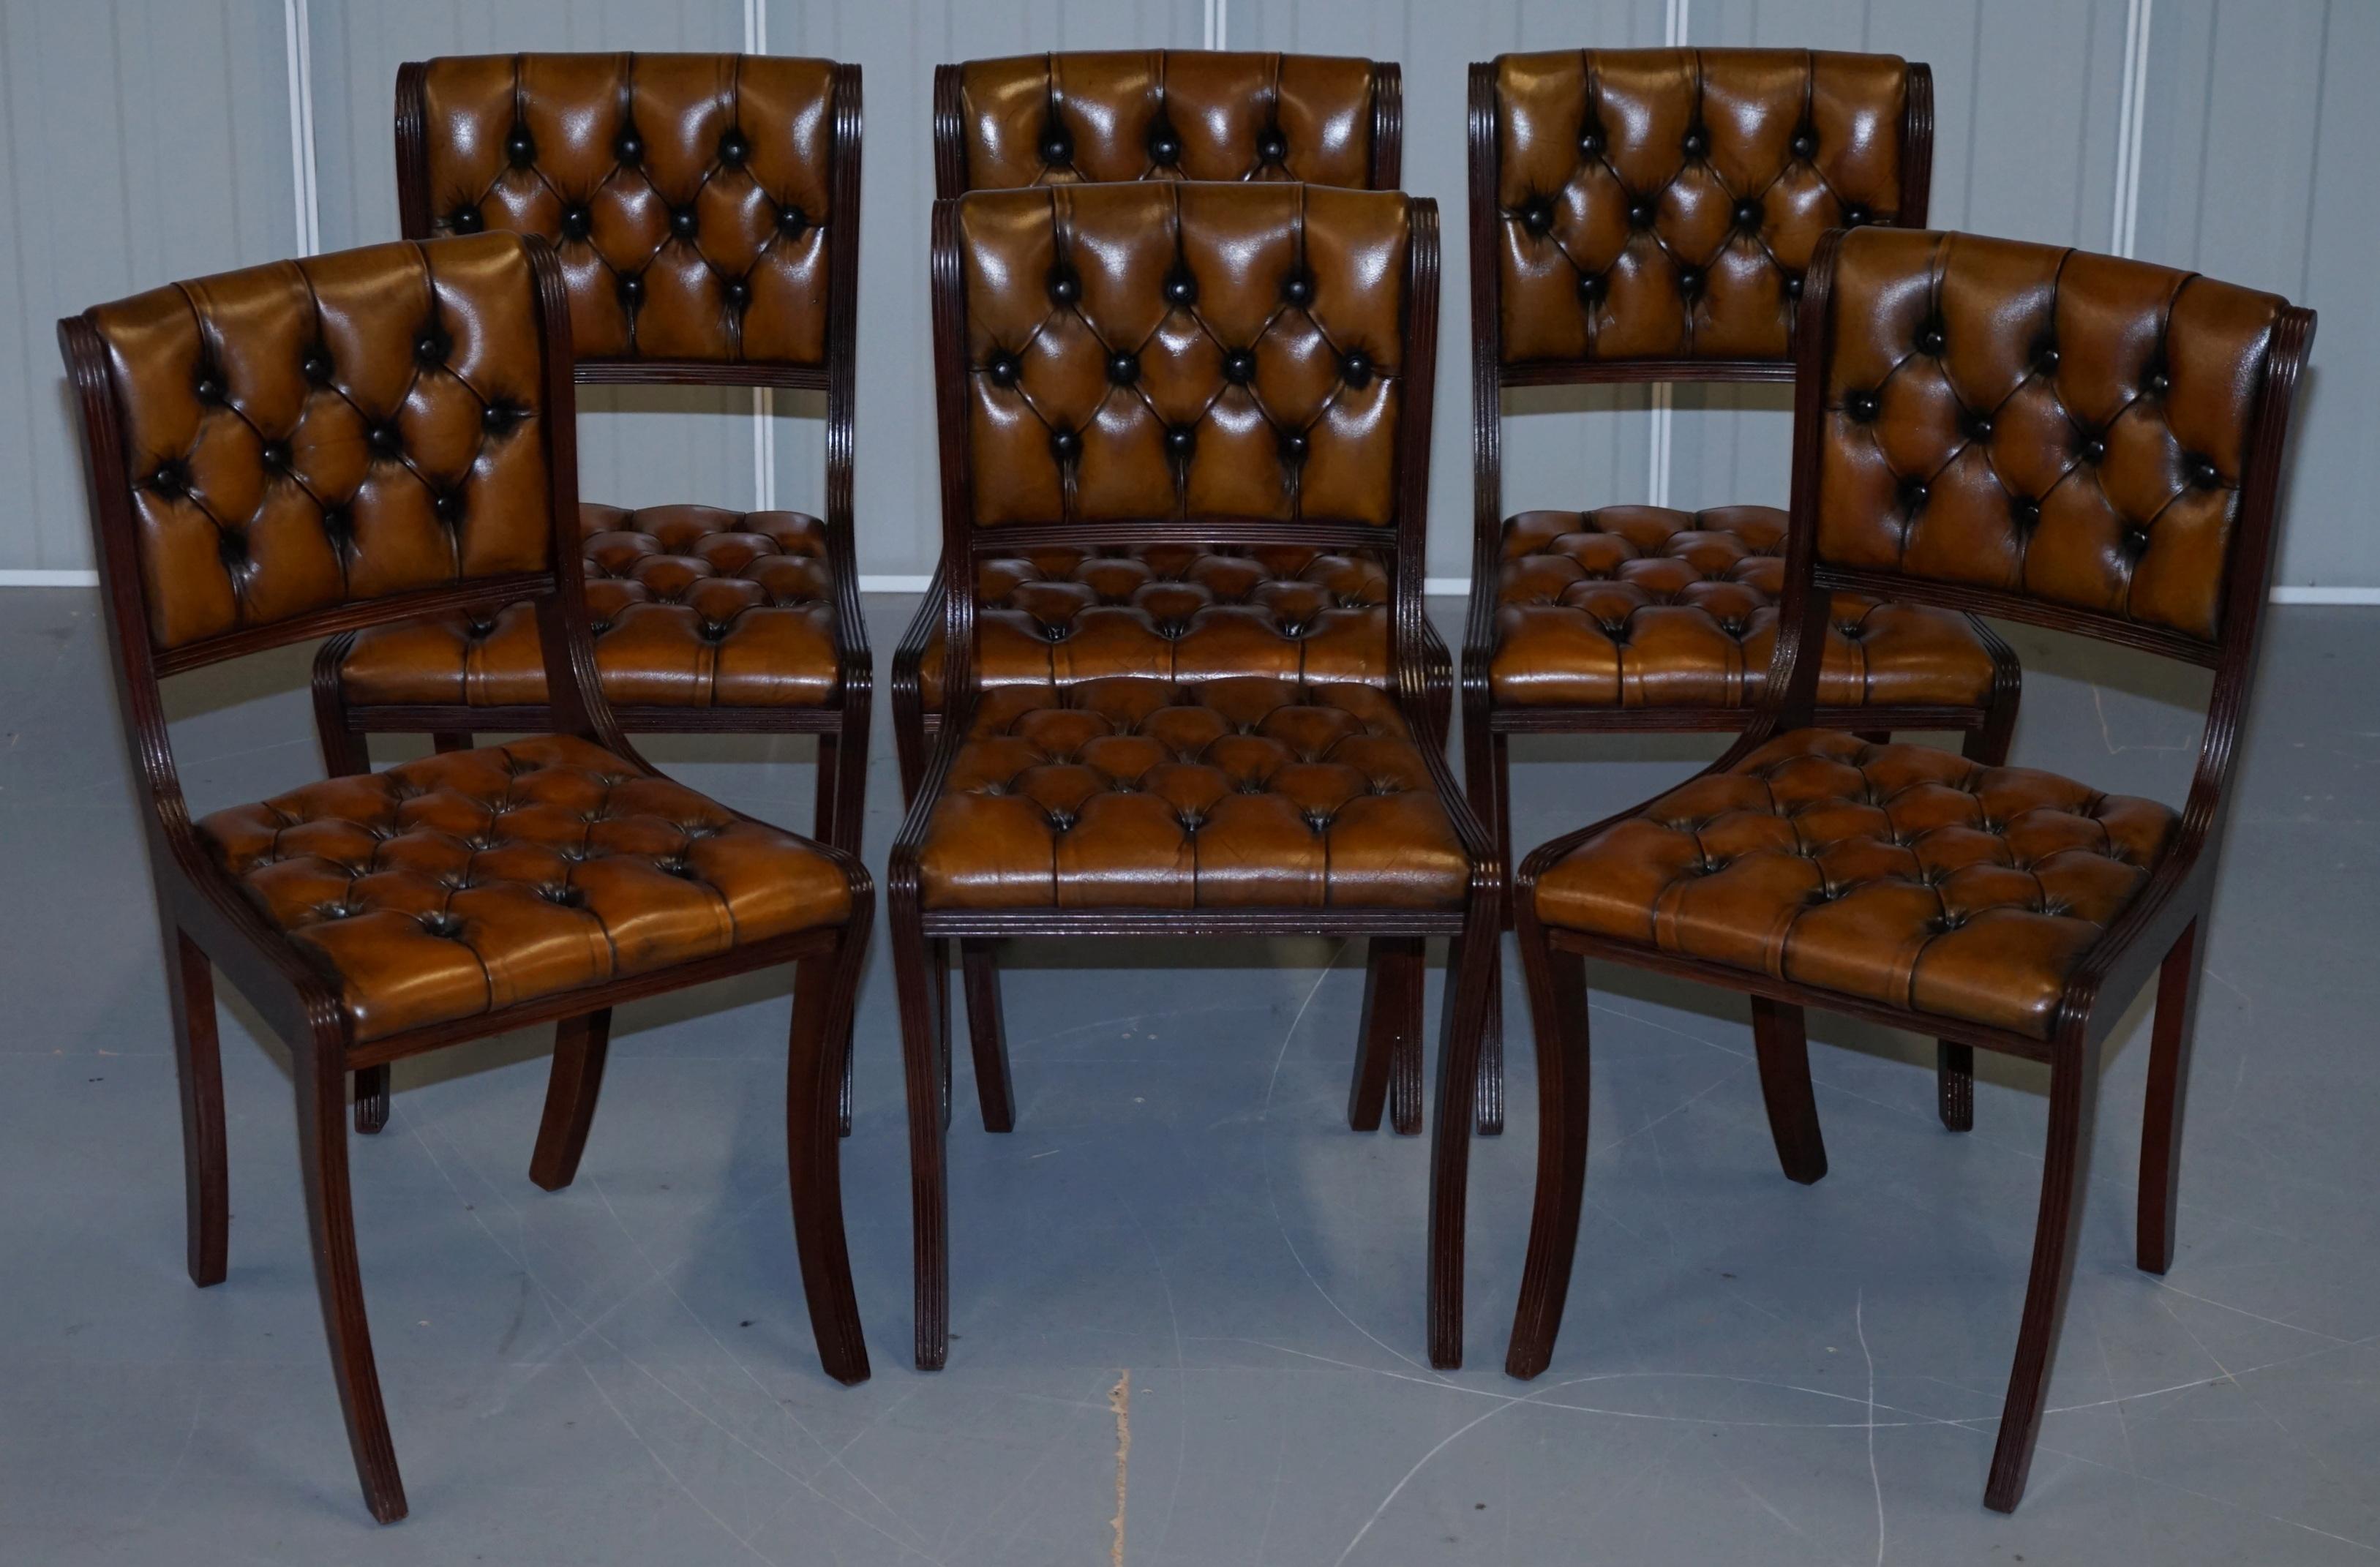 We are delighted to offer for sale this stunning set of eight Vintage fully restored Chesterfield aged cigar brown leather dining chairs

A very good looking and well made suite, the frames are all mahogany, they have reeded frames running down